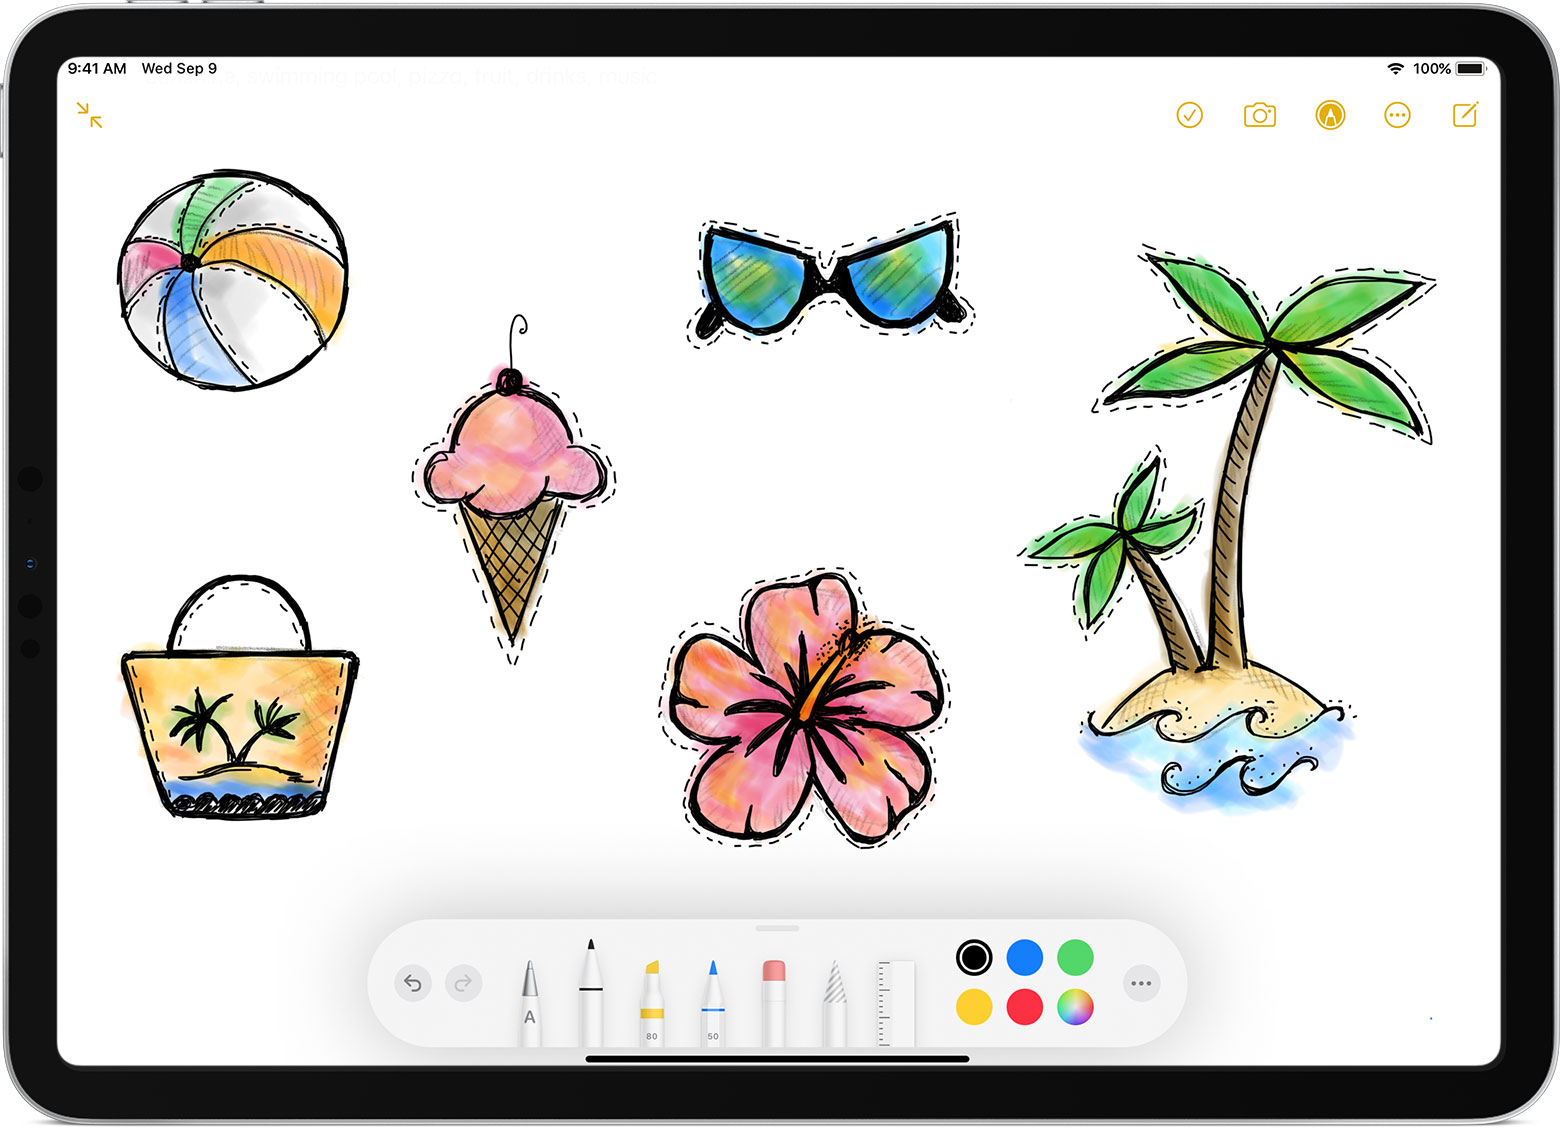 how-to-draw-sketch-in-the-notes-app-on-your-iphone-or-ipad